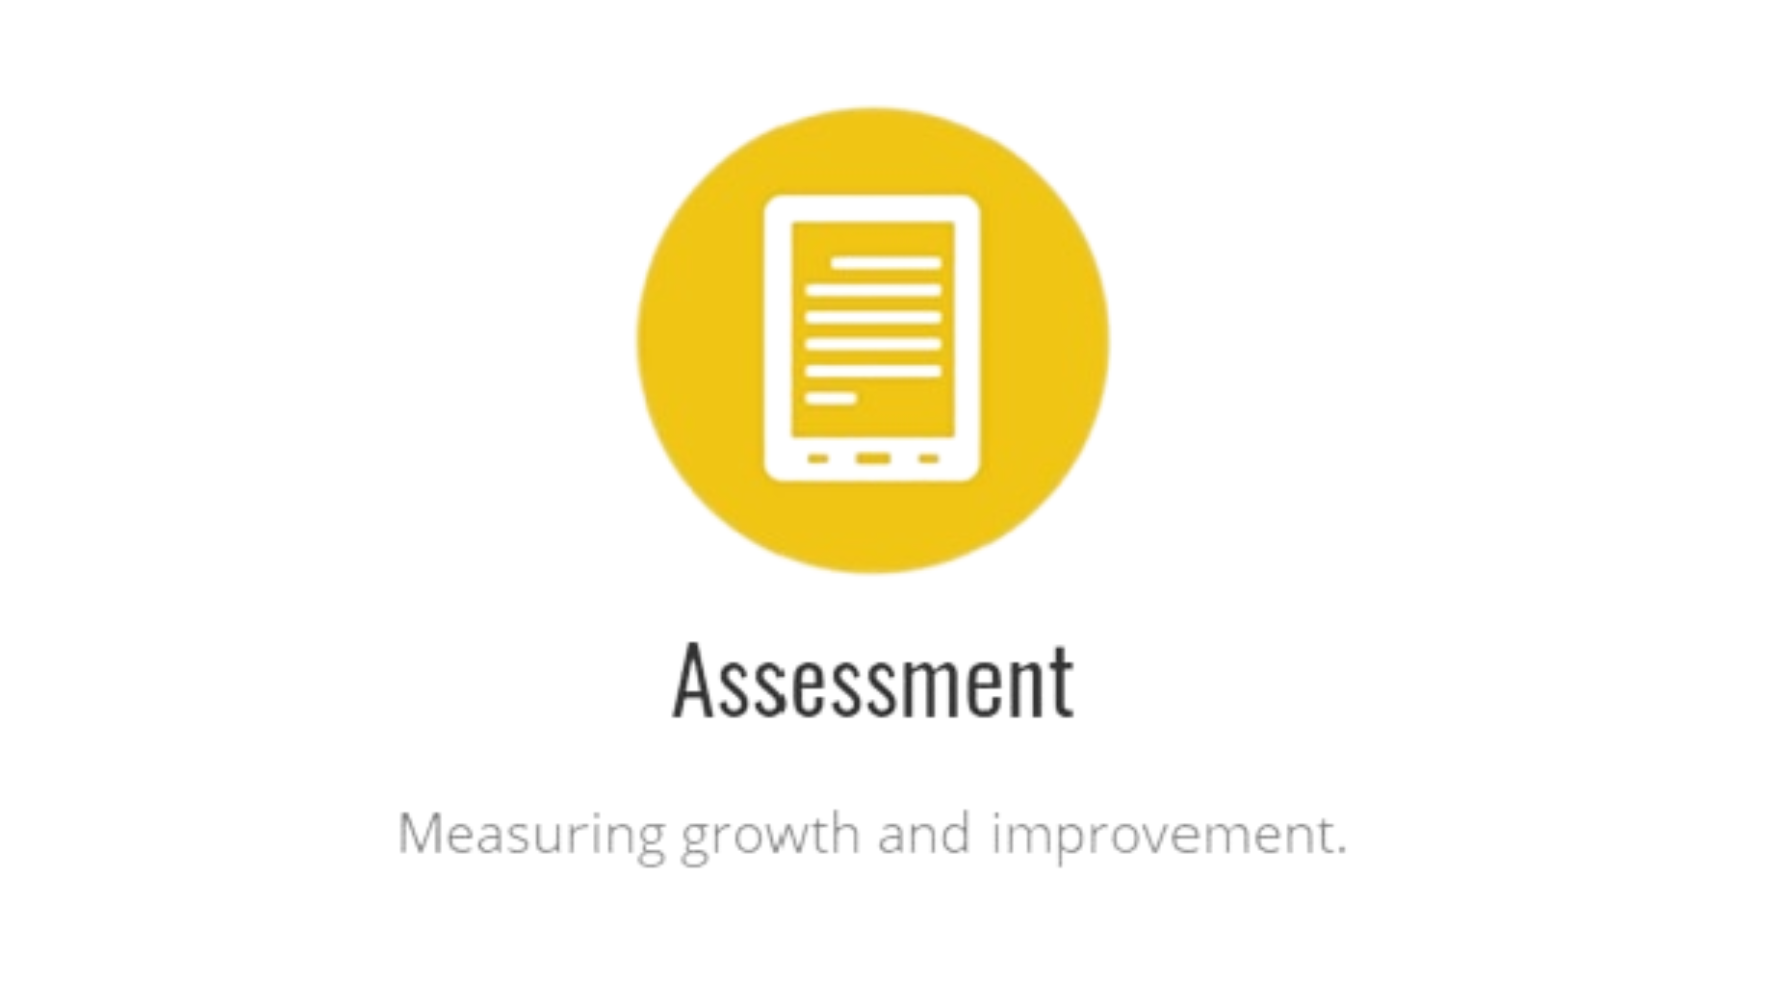 Assessment Measuring growth and improvement.